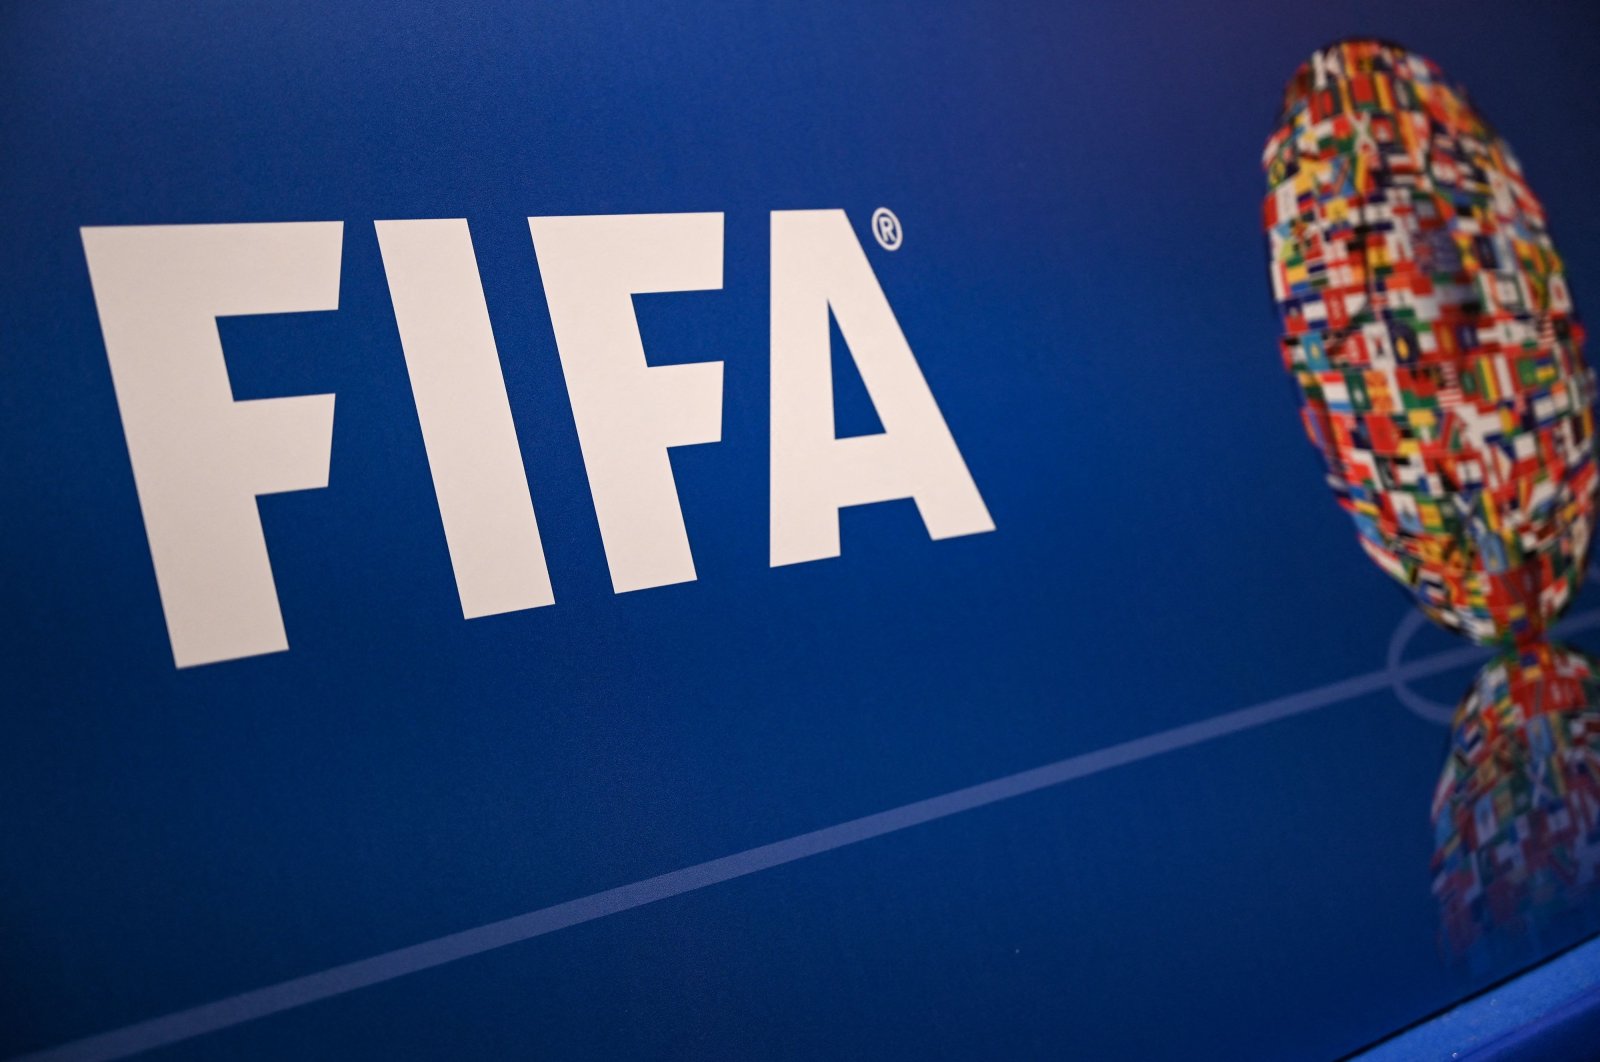 The FIFA logo is seen at a press event in Istanbul, Türkiye, Aug. 15, 2022. (AFP Photo)